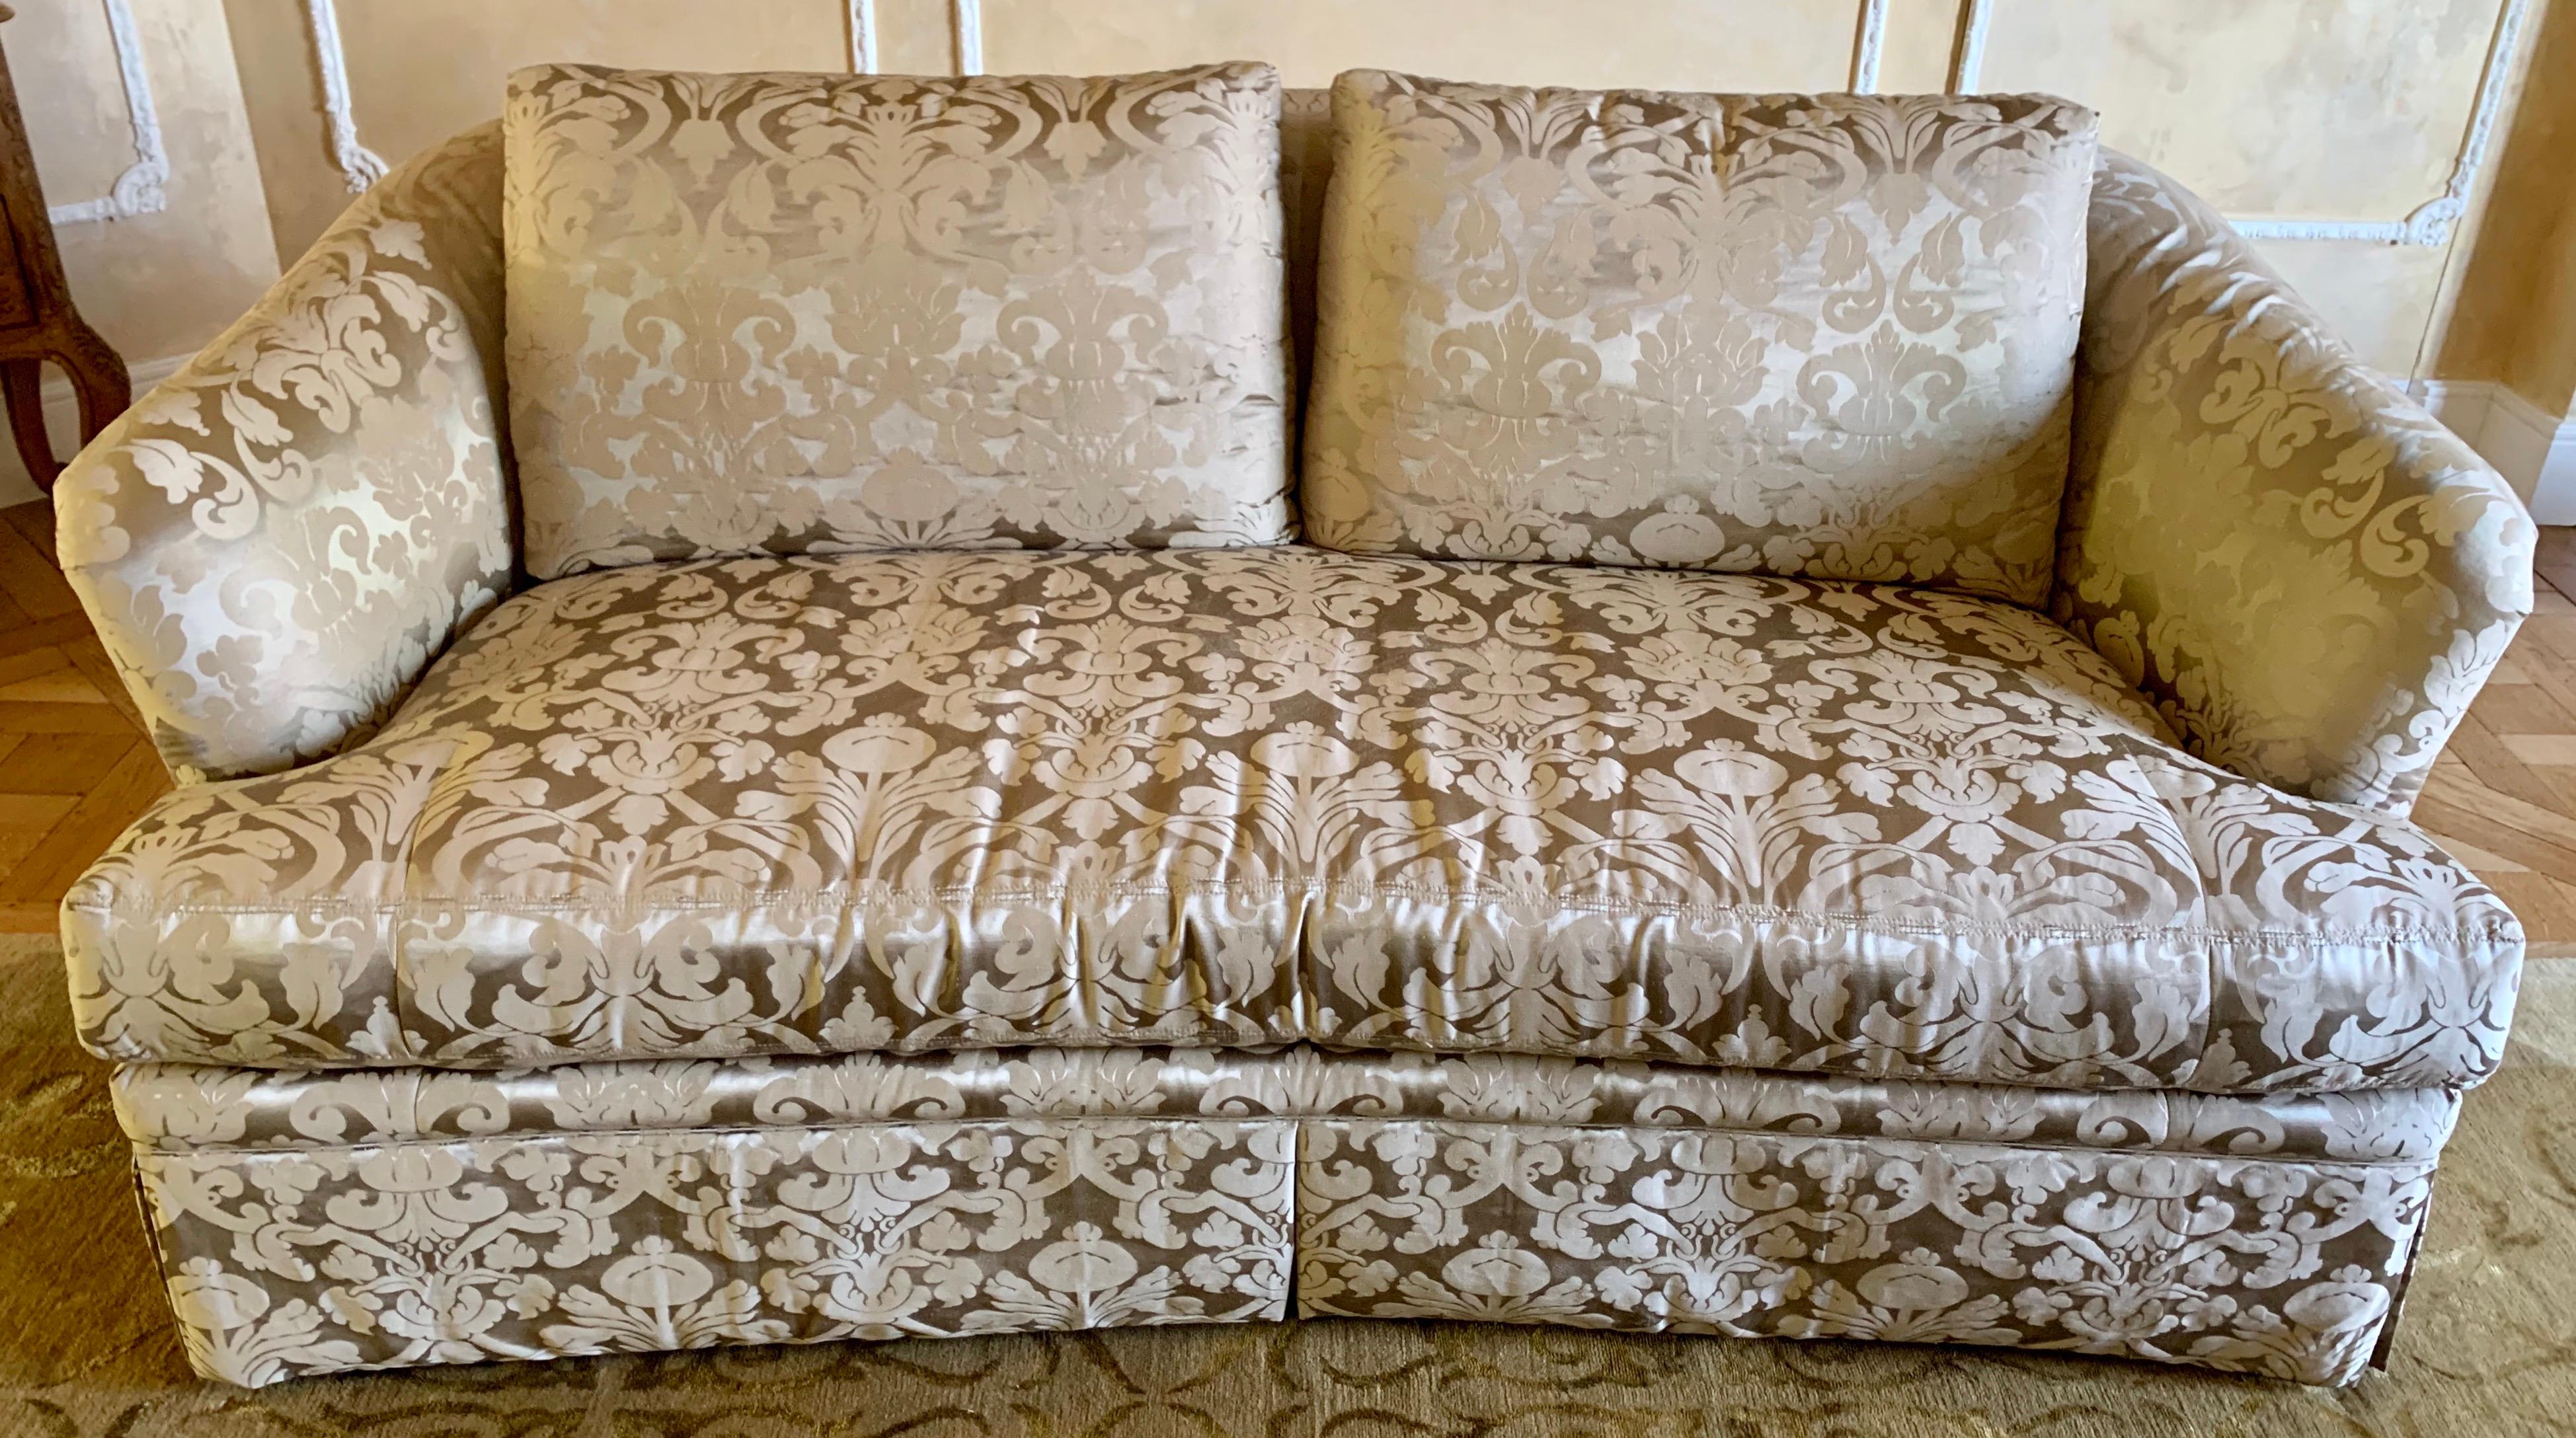 Elegant, mint condition Ferguson Copeland silk damask three-seat sofa. The colors are stunning, taupe and a metallic, subtle gold.
Outstanding craftsmanship including eight-way hand tied construction.